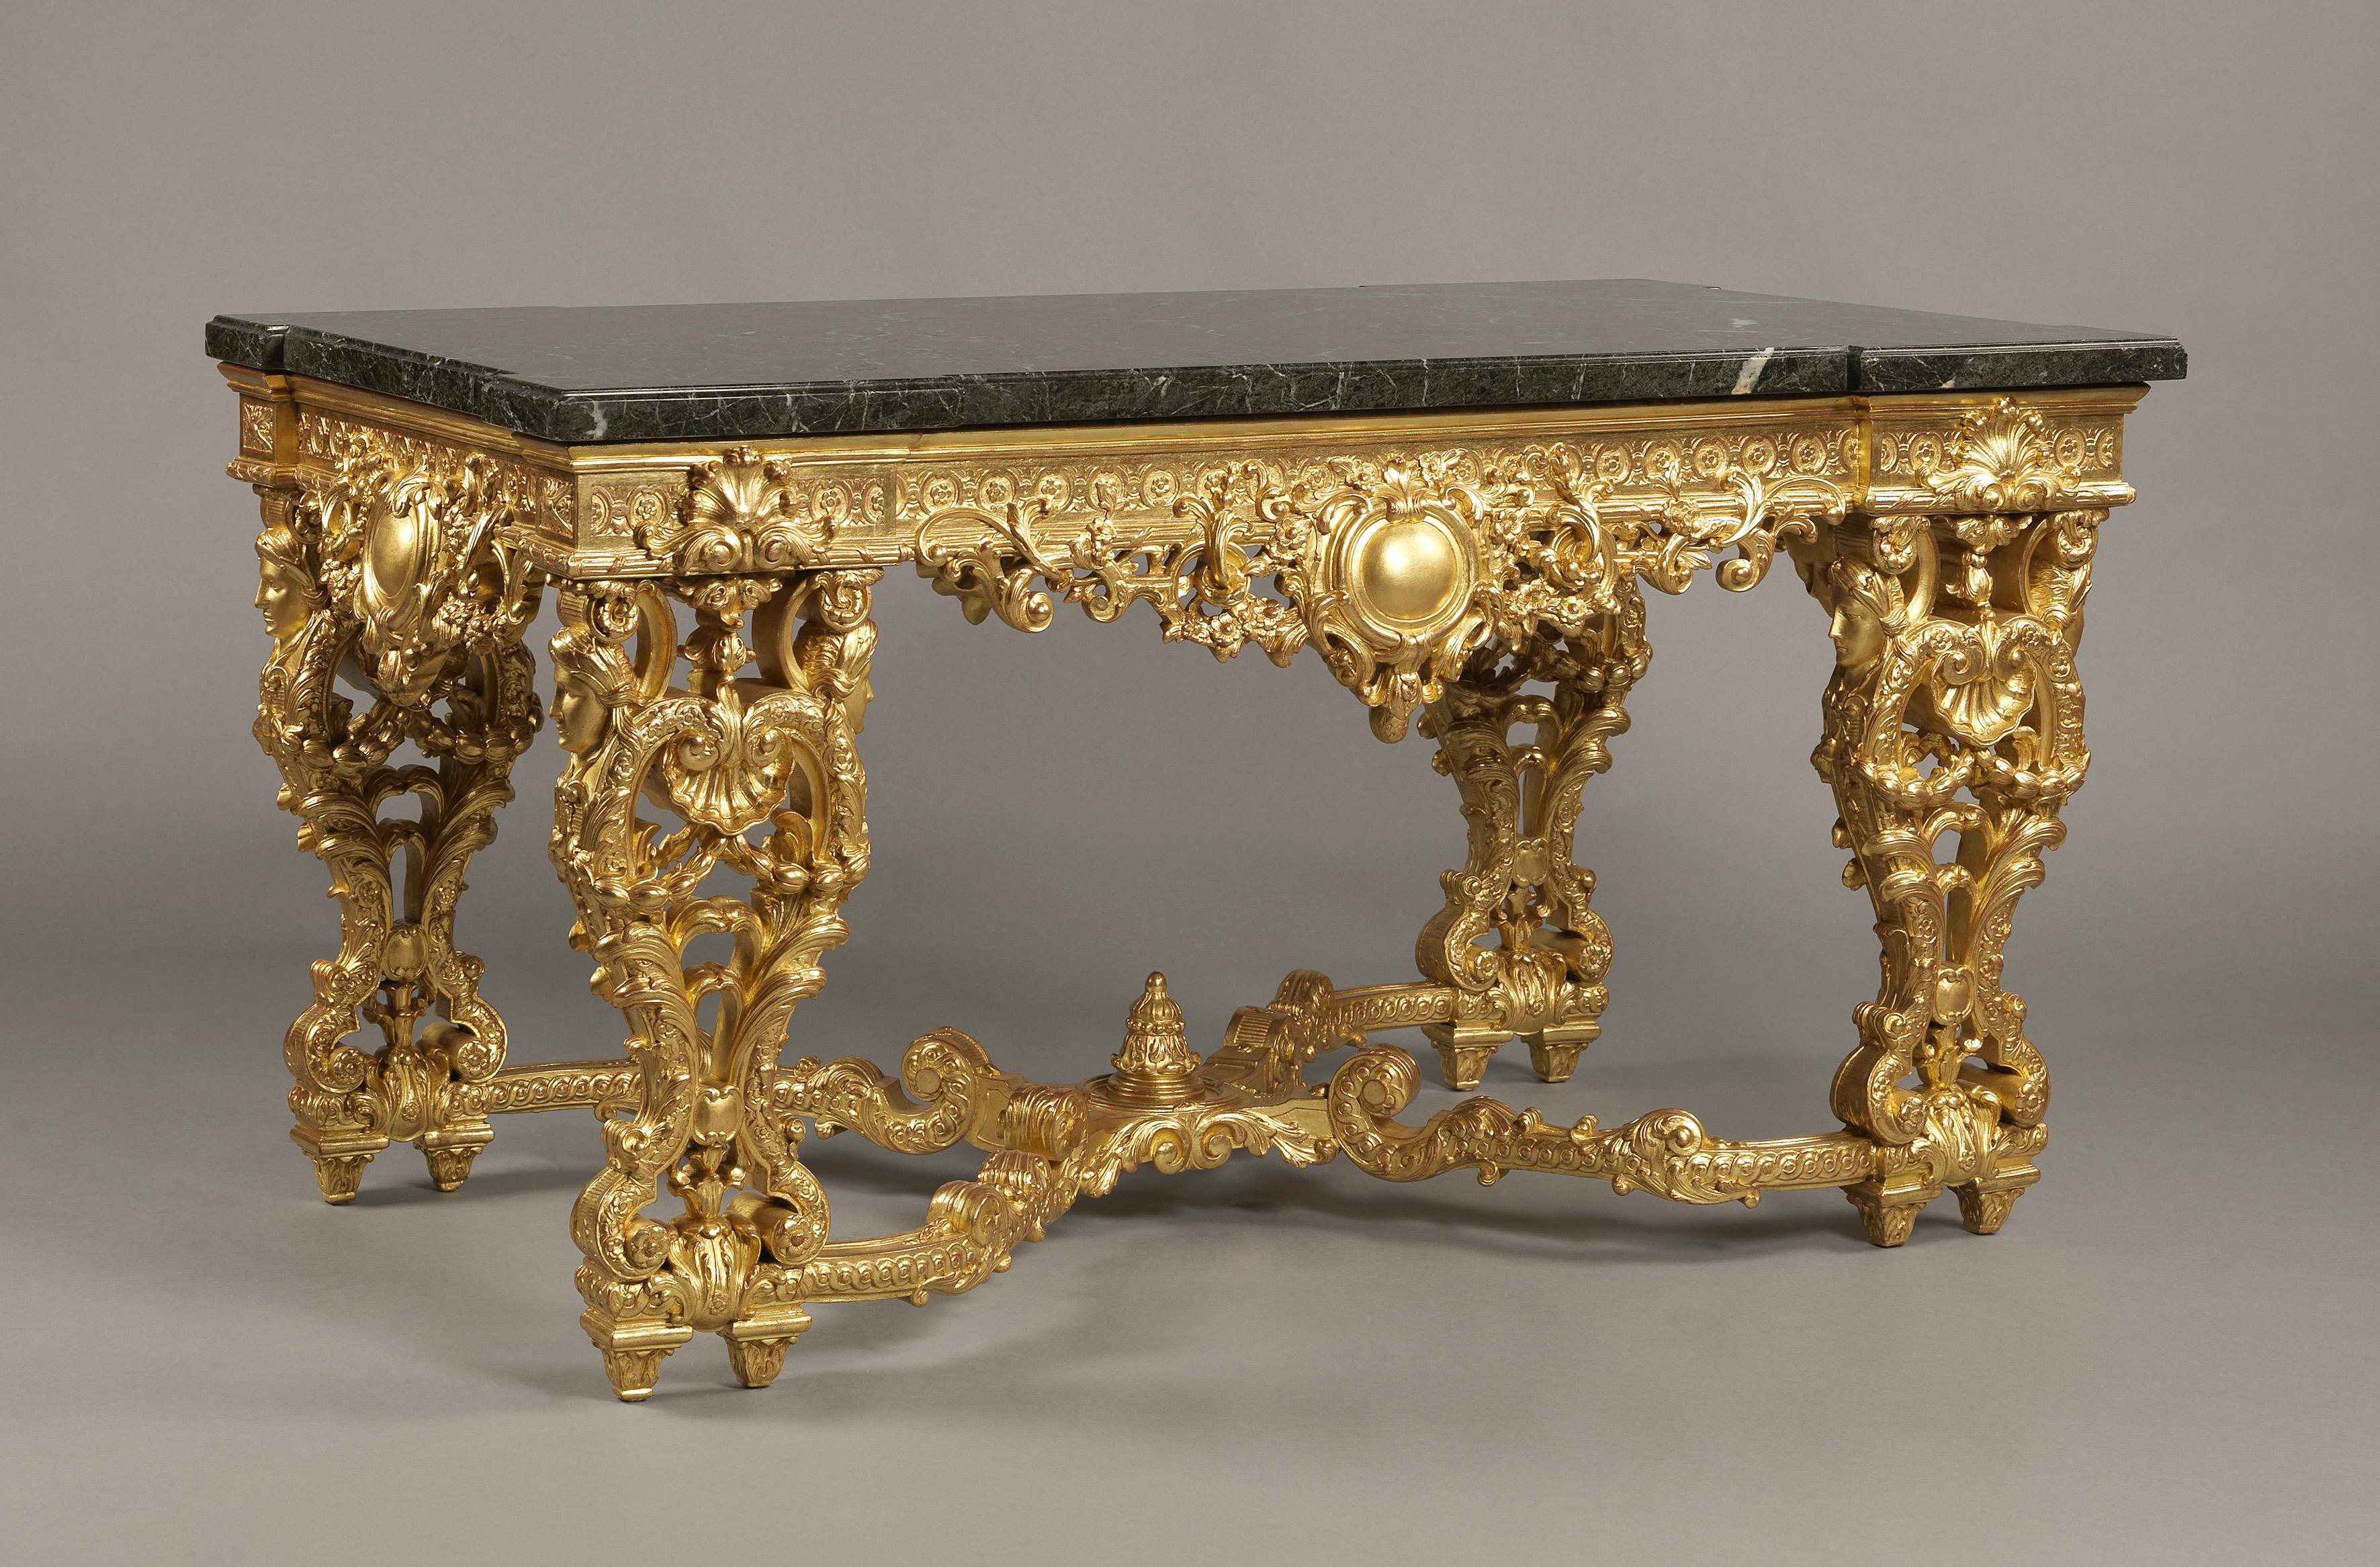 A finely carved Louis XIV/Regence style giltwood centre table with a rare Patricia green Italian marble top.

French, circa 1880. 

This impressive centre table is based on the celebrated table made for the Château de Bercy now in the Louvre,